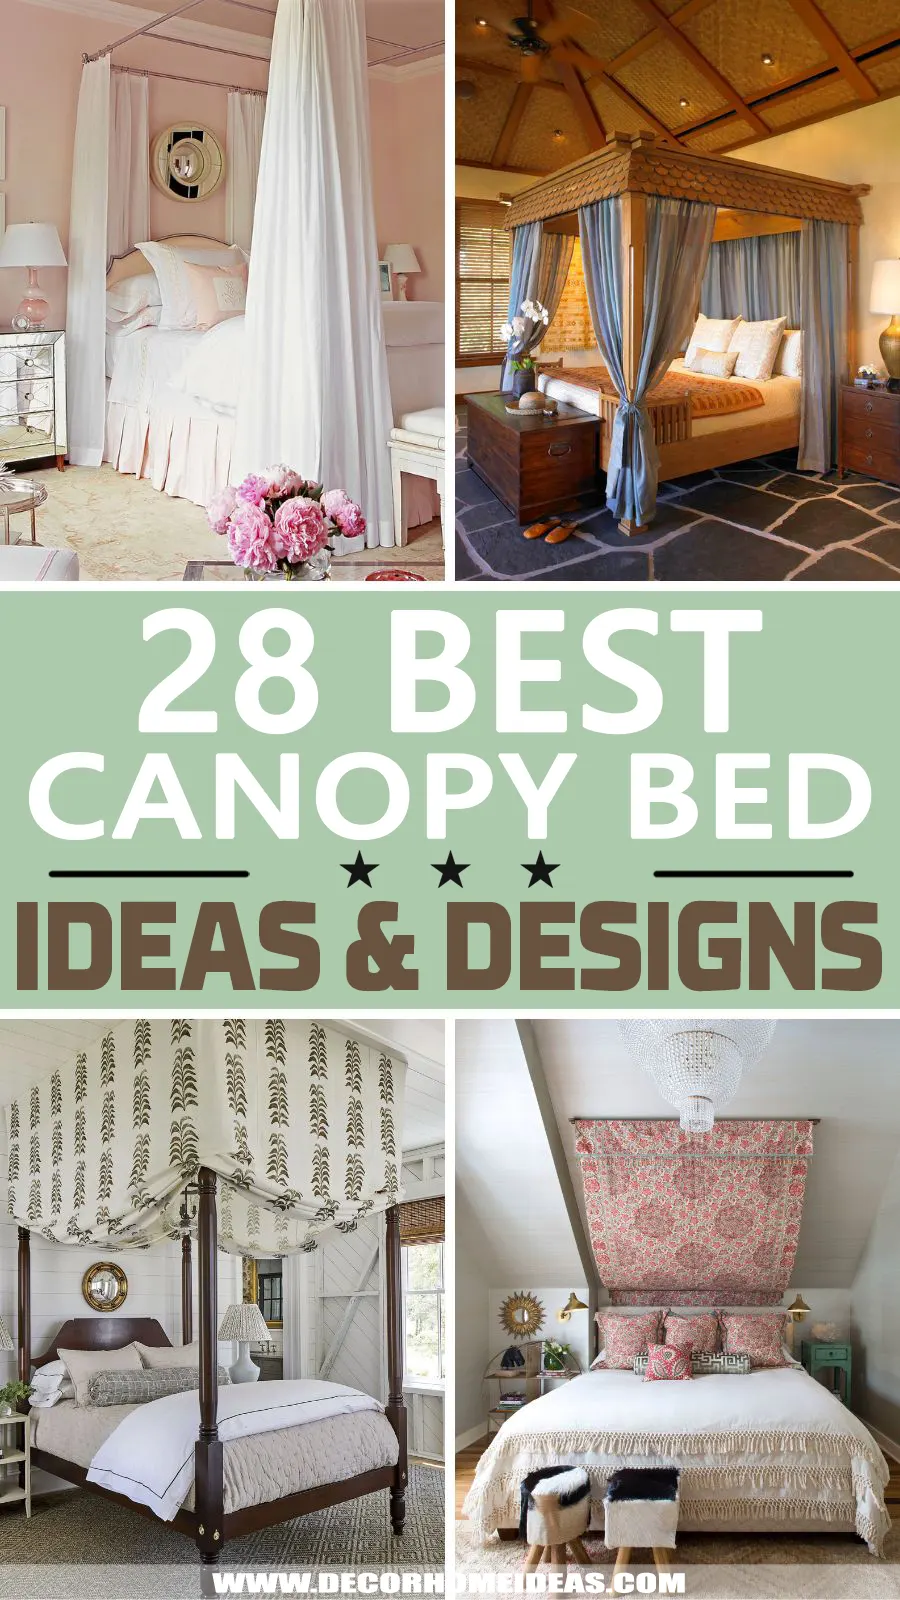 Best Canopy Bed Ideas. Take a look at the best canopy bed ideas to create a dreamy bedroom and relax like in a fairy tale. 